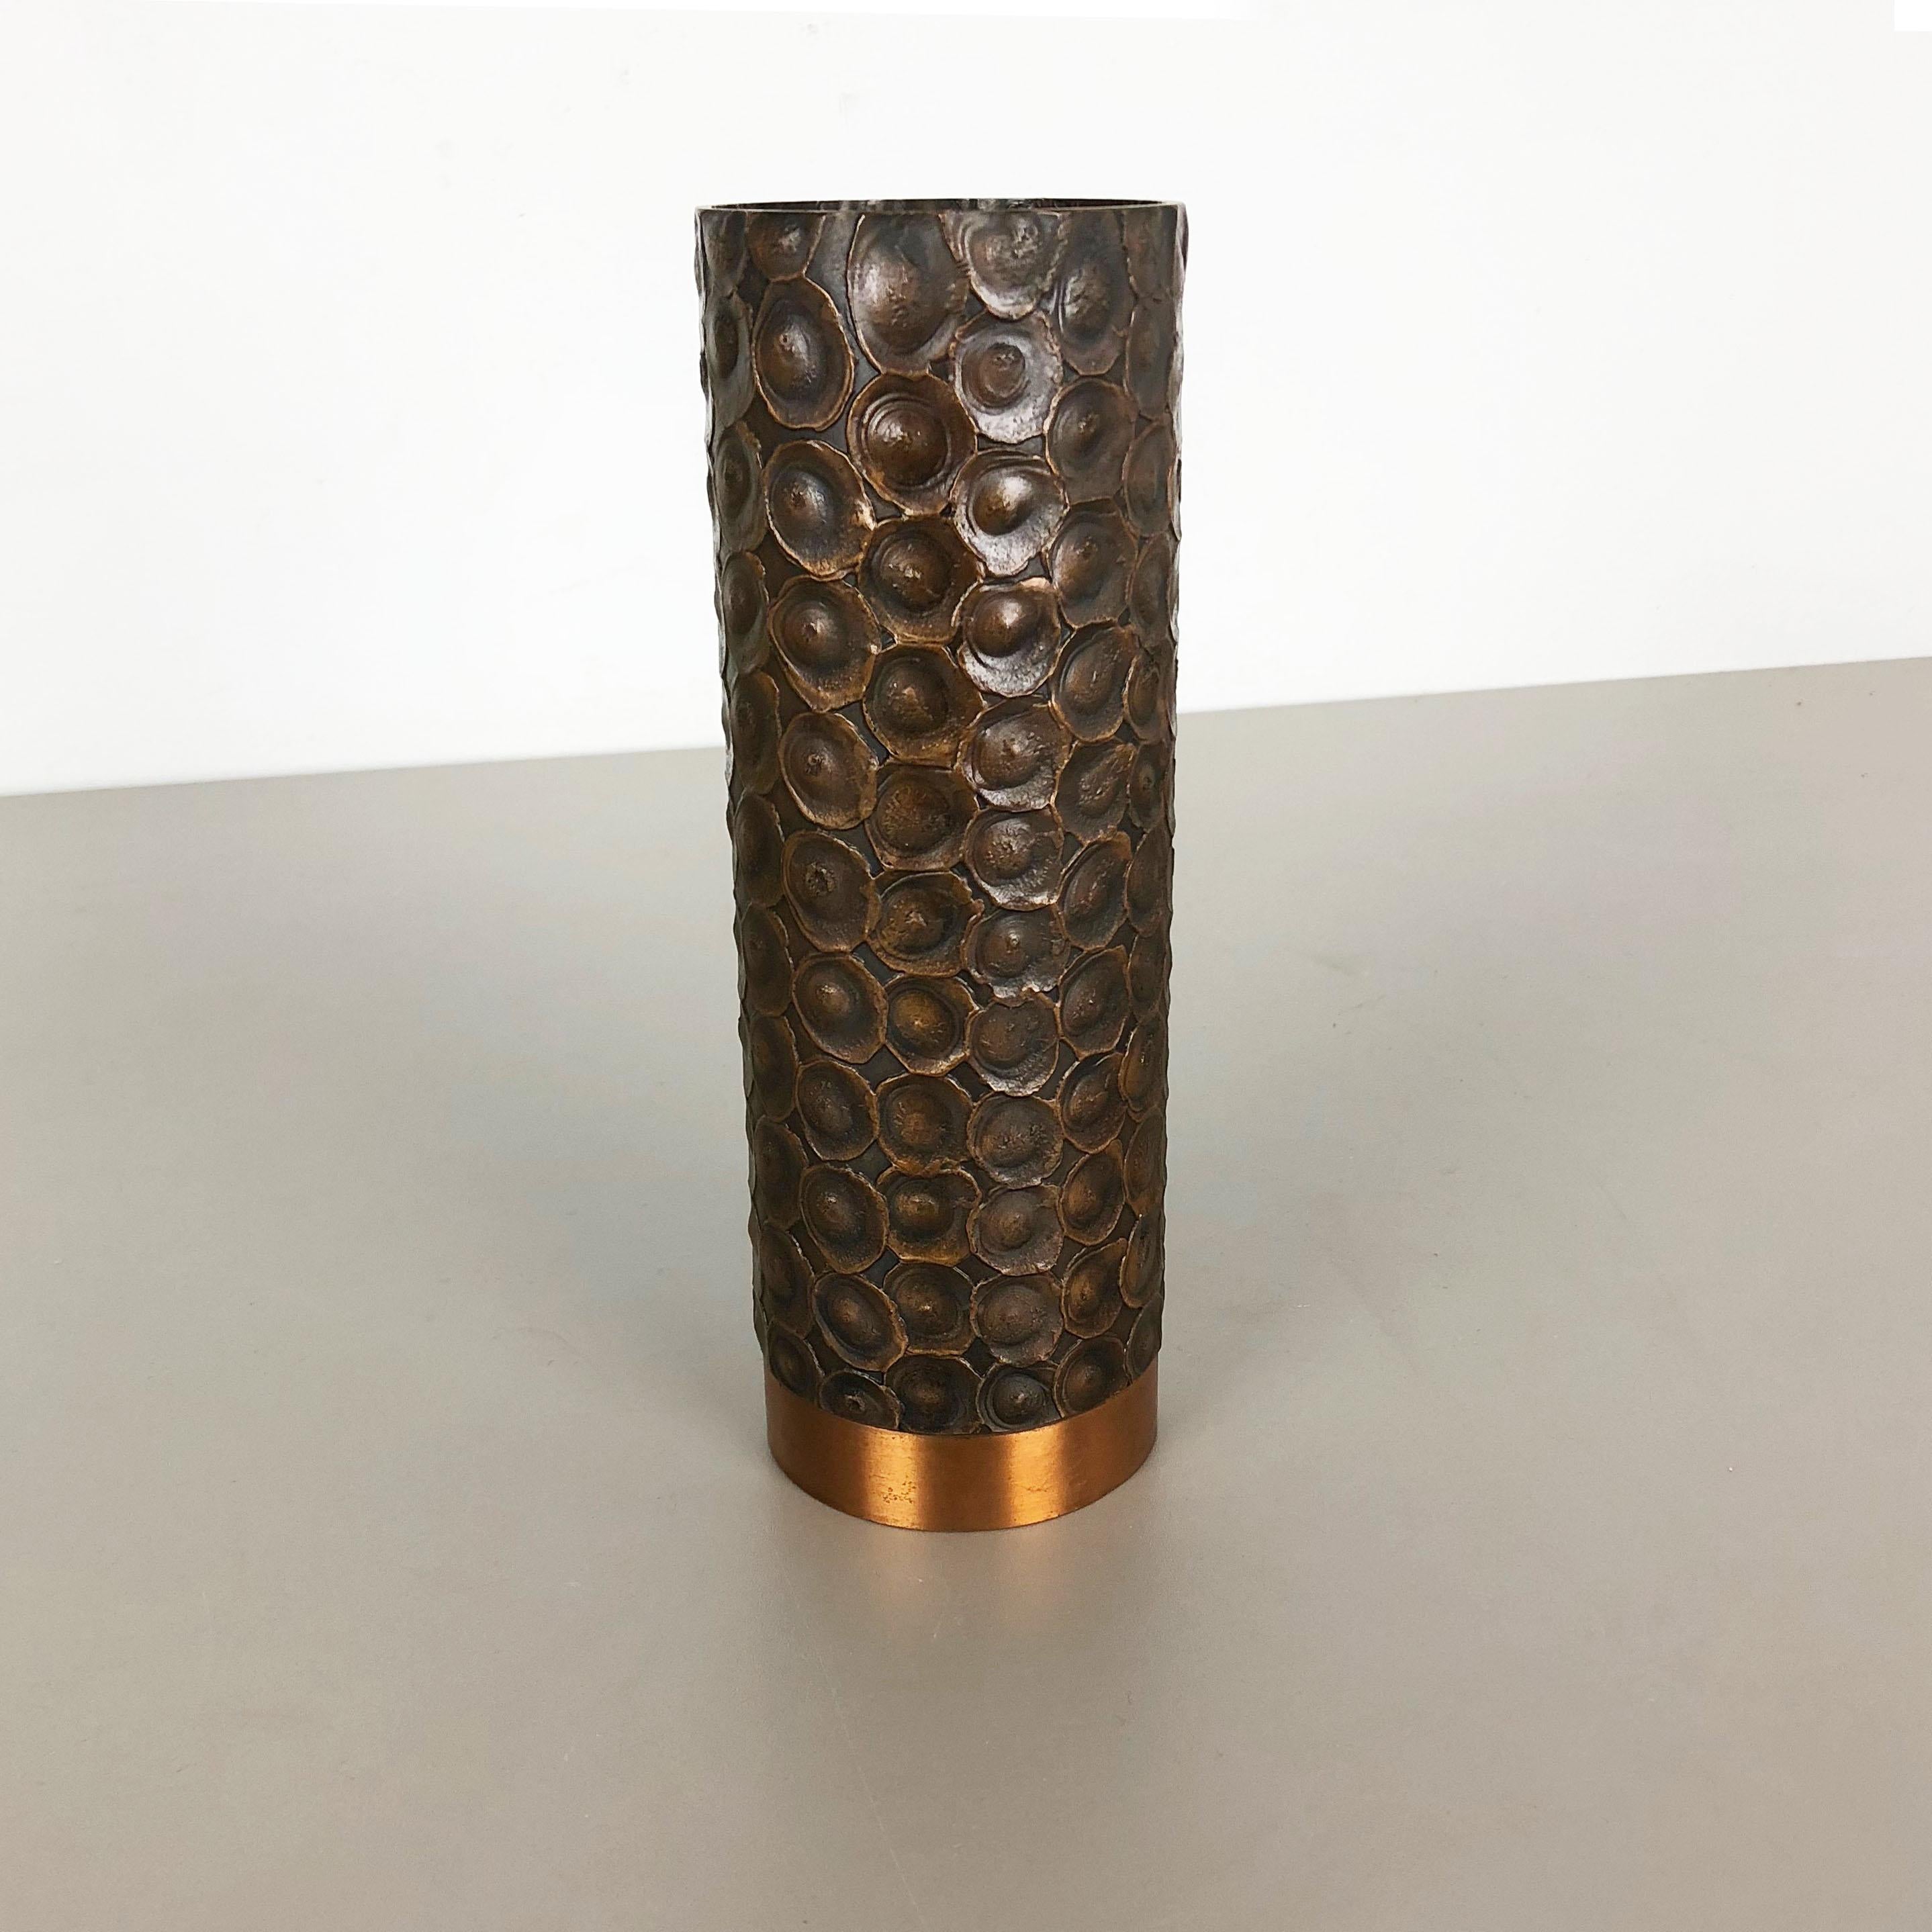 Article: Brutalist tripod candleholder

Origin: Austria

Material: Solid copper

Decade: 1950s

Description: This original vintage vase, was produced in the 1950s in Austria. It is made of solid copper, and has a lovely patination due to the